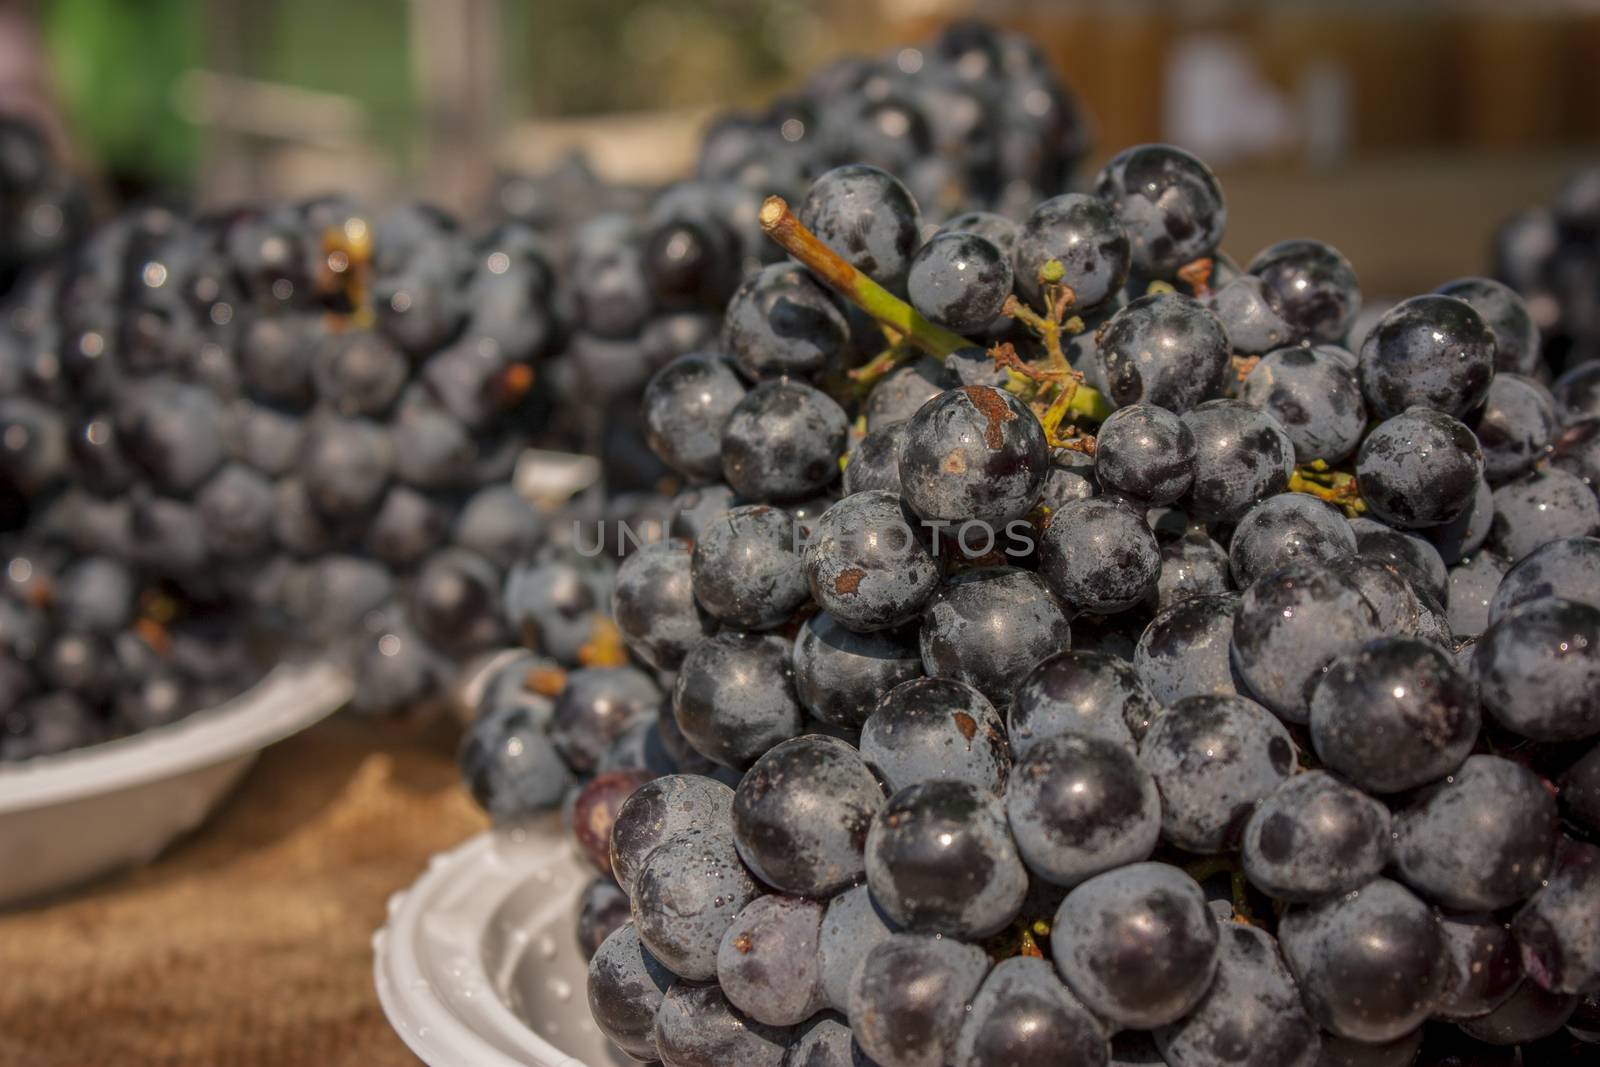 Bunches of grapes in a table ready to be tasted.